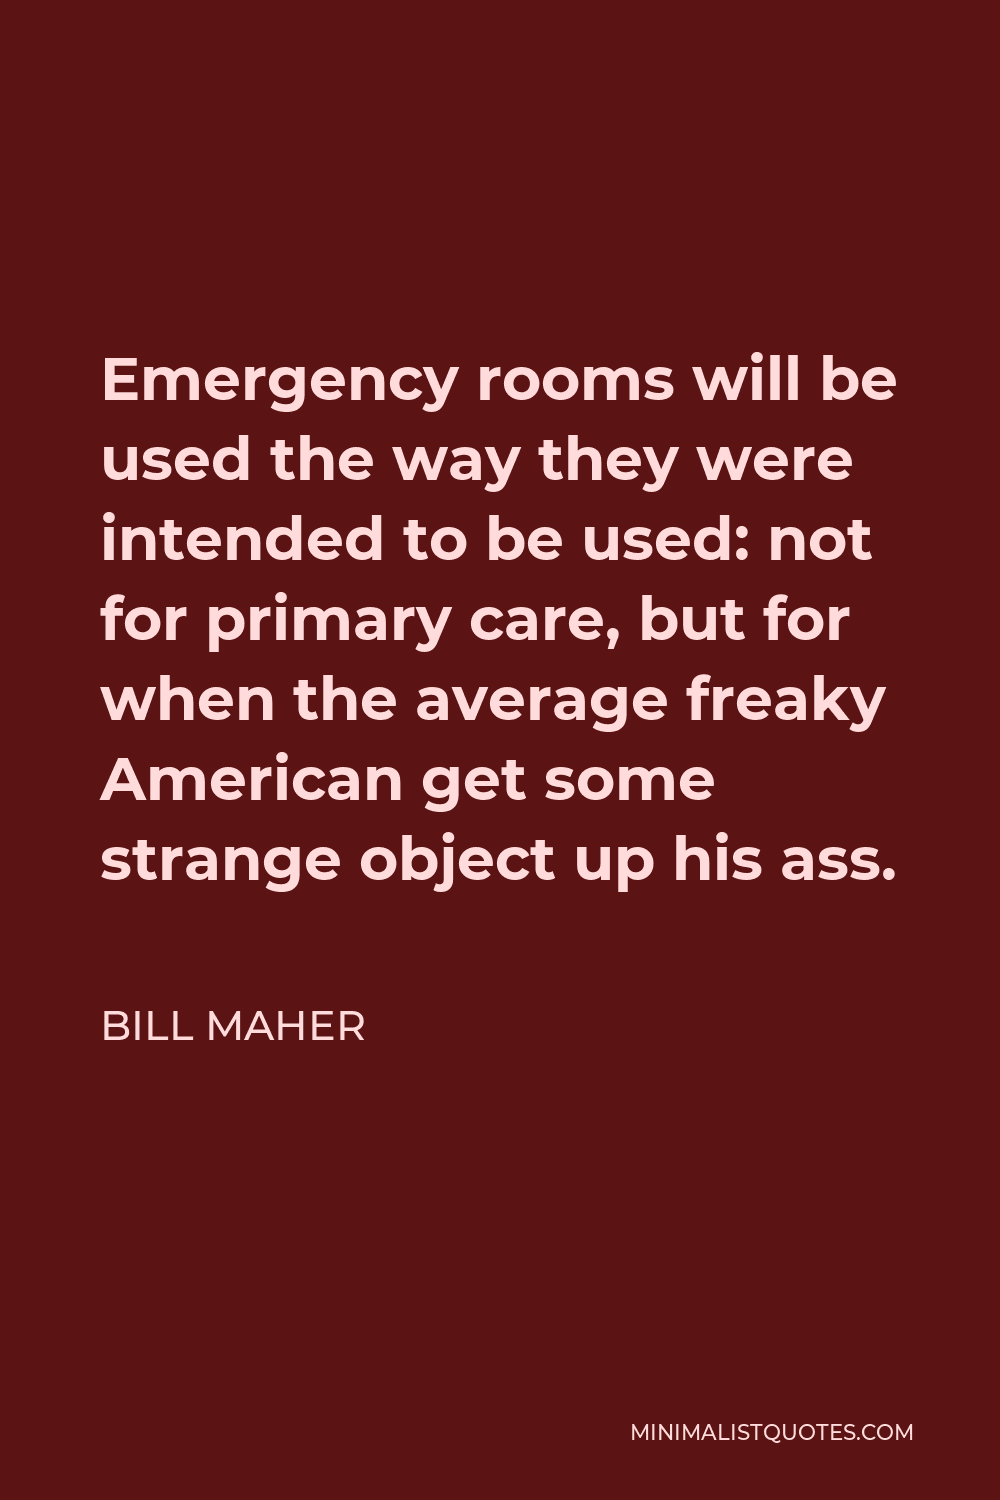 Bill Maher Quote - Emergency rooms will be used the way they were intended to be used: not for primary care, but for when the average freaky American get some strange object up his ass.